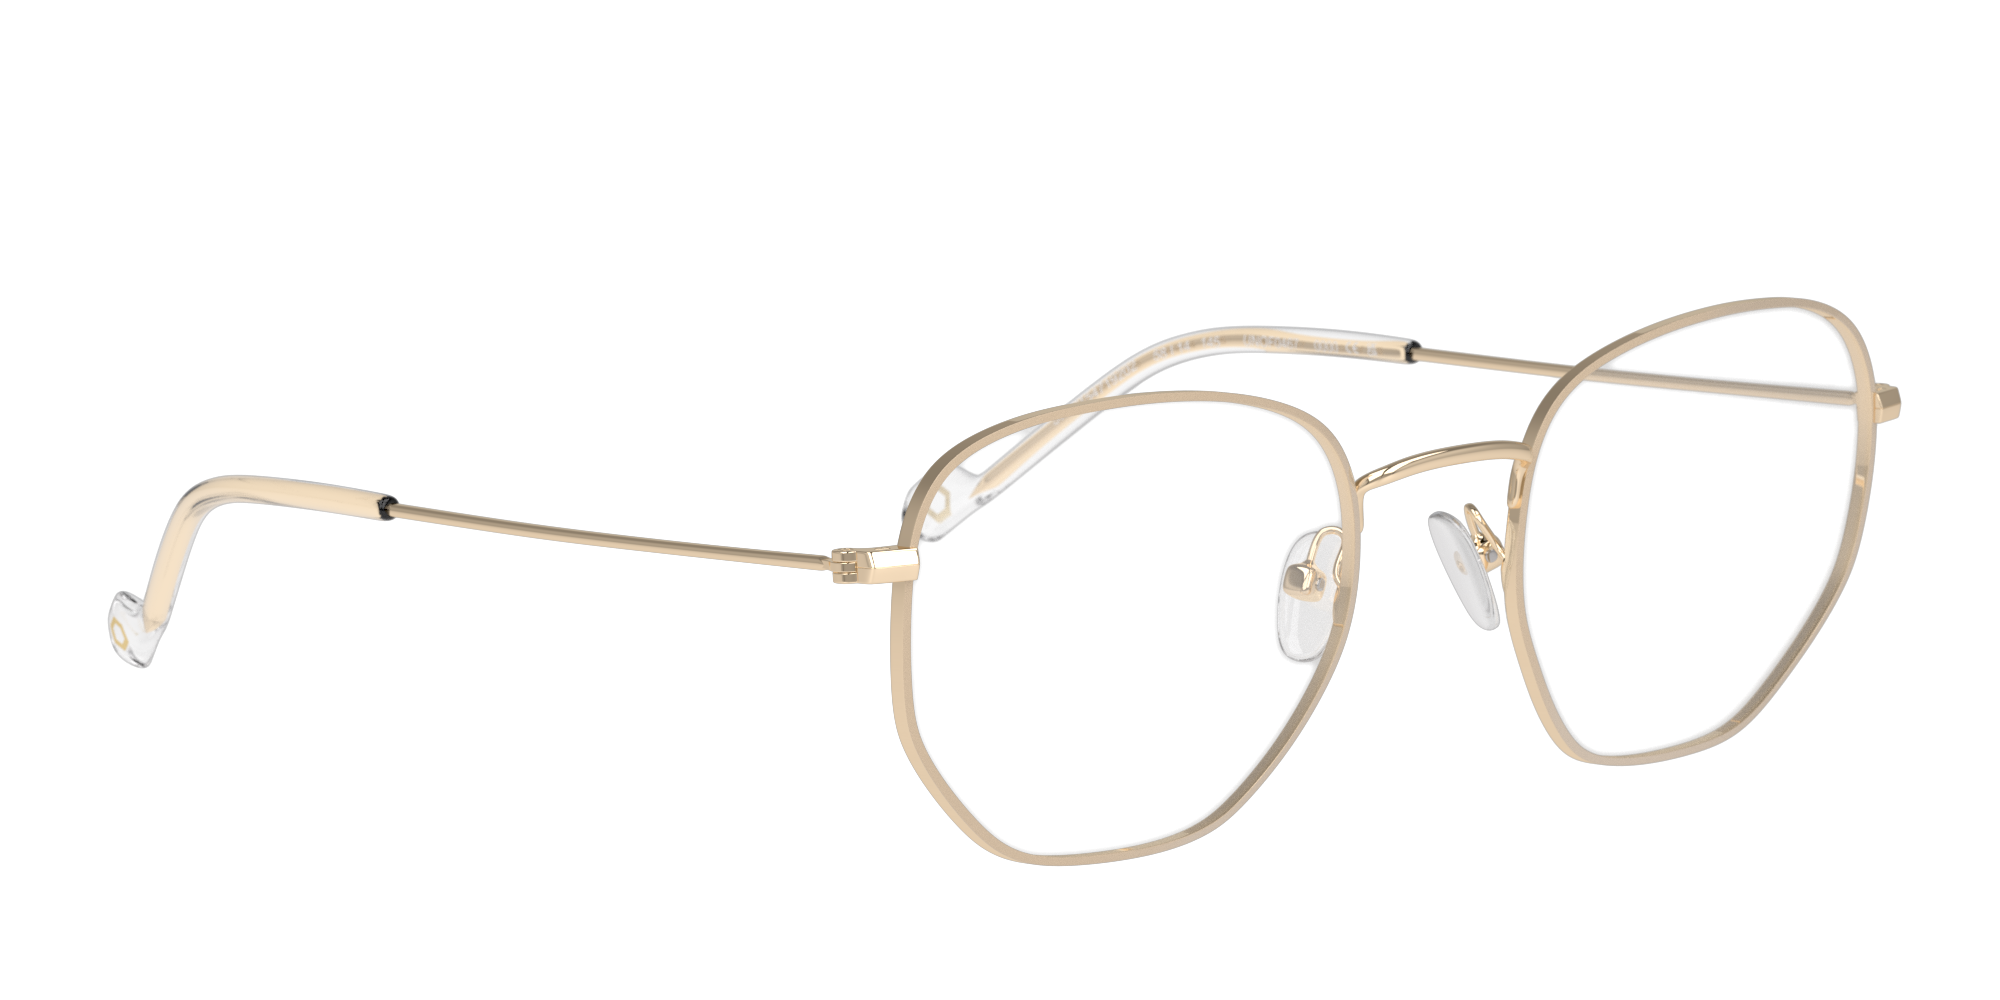 Angle_Right01 Unofficial UNOF0444 (FD00) Glasses Transparent / Beige